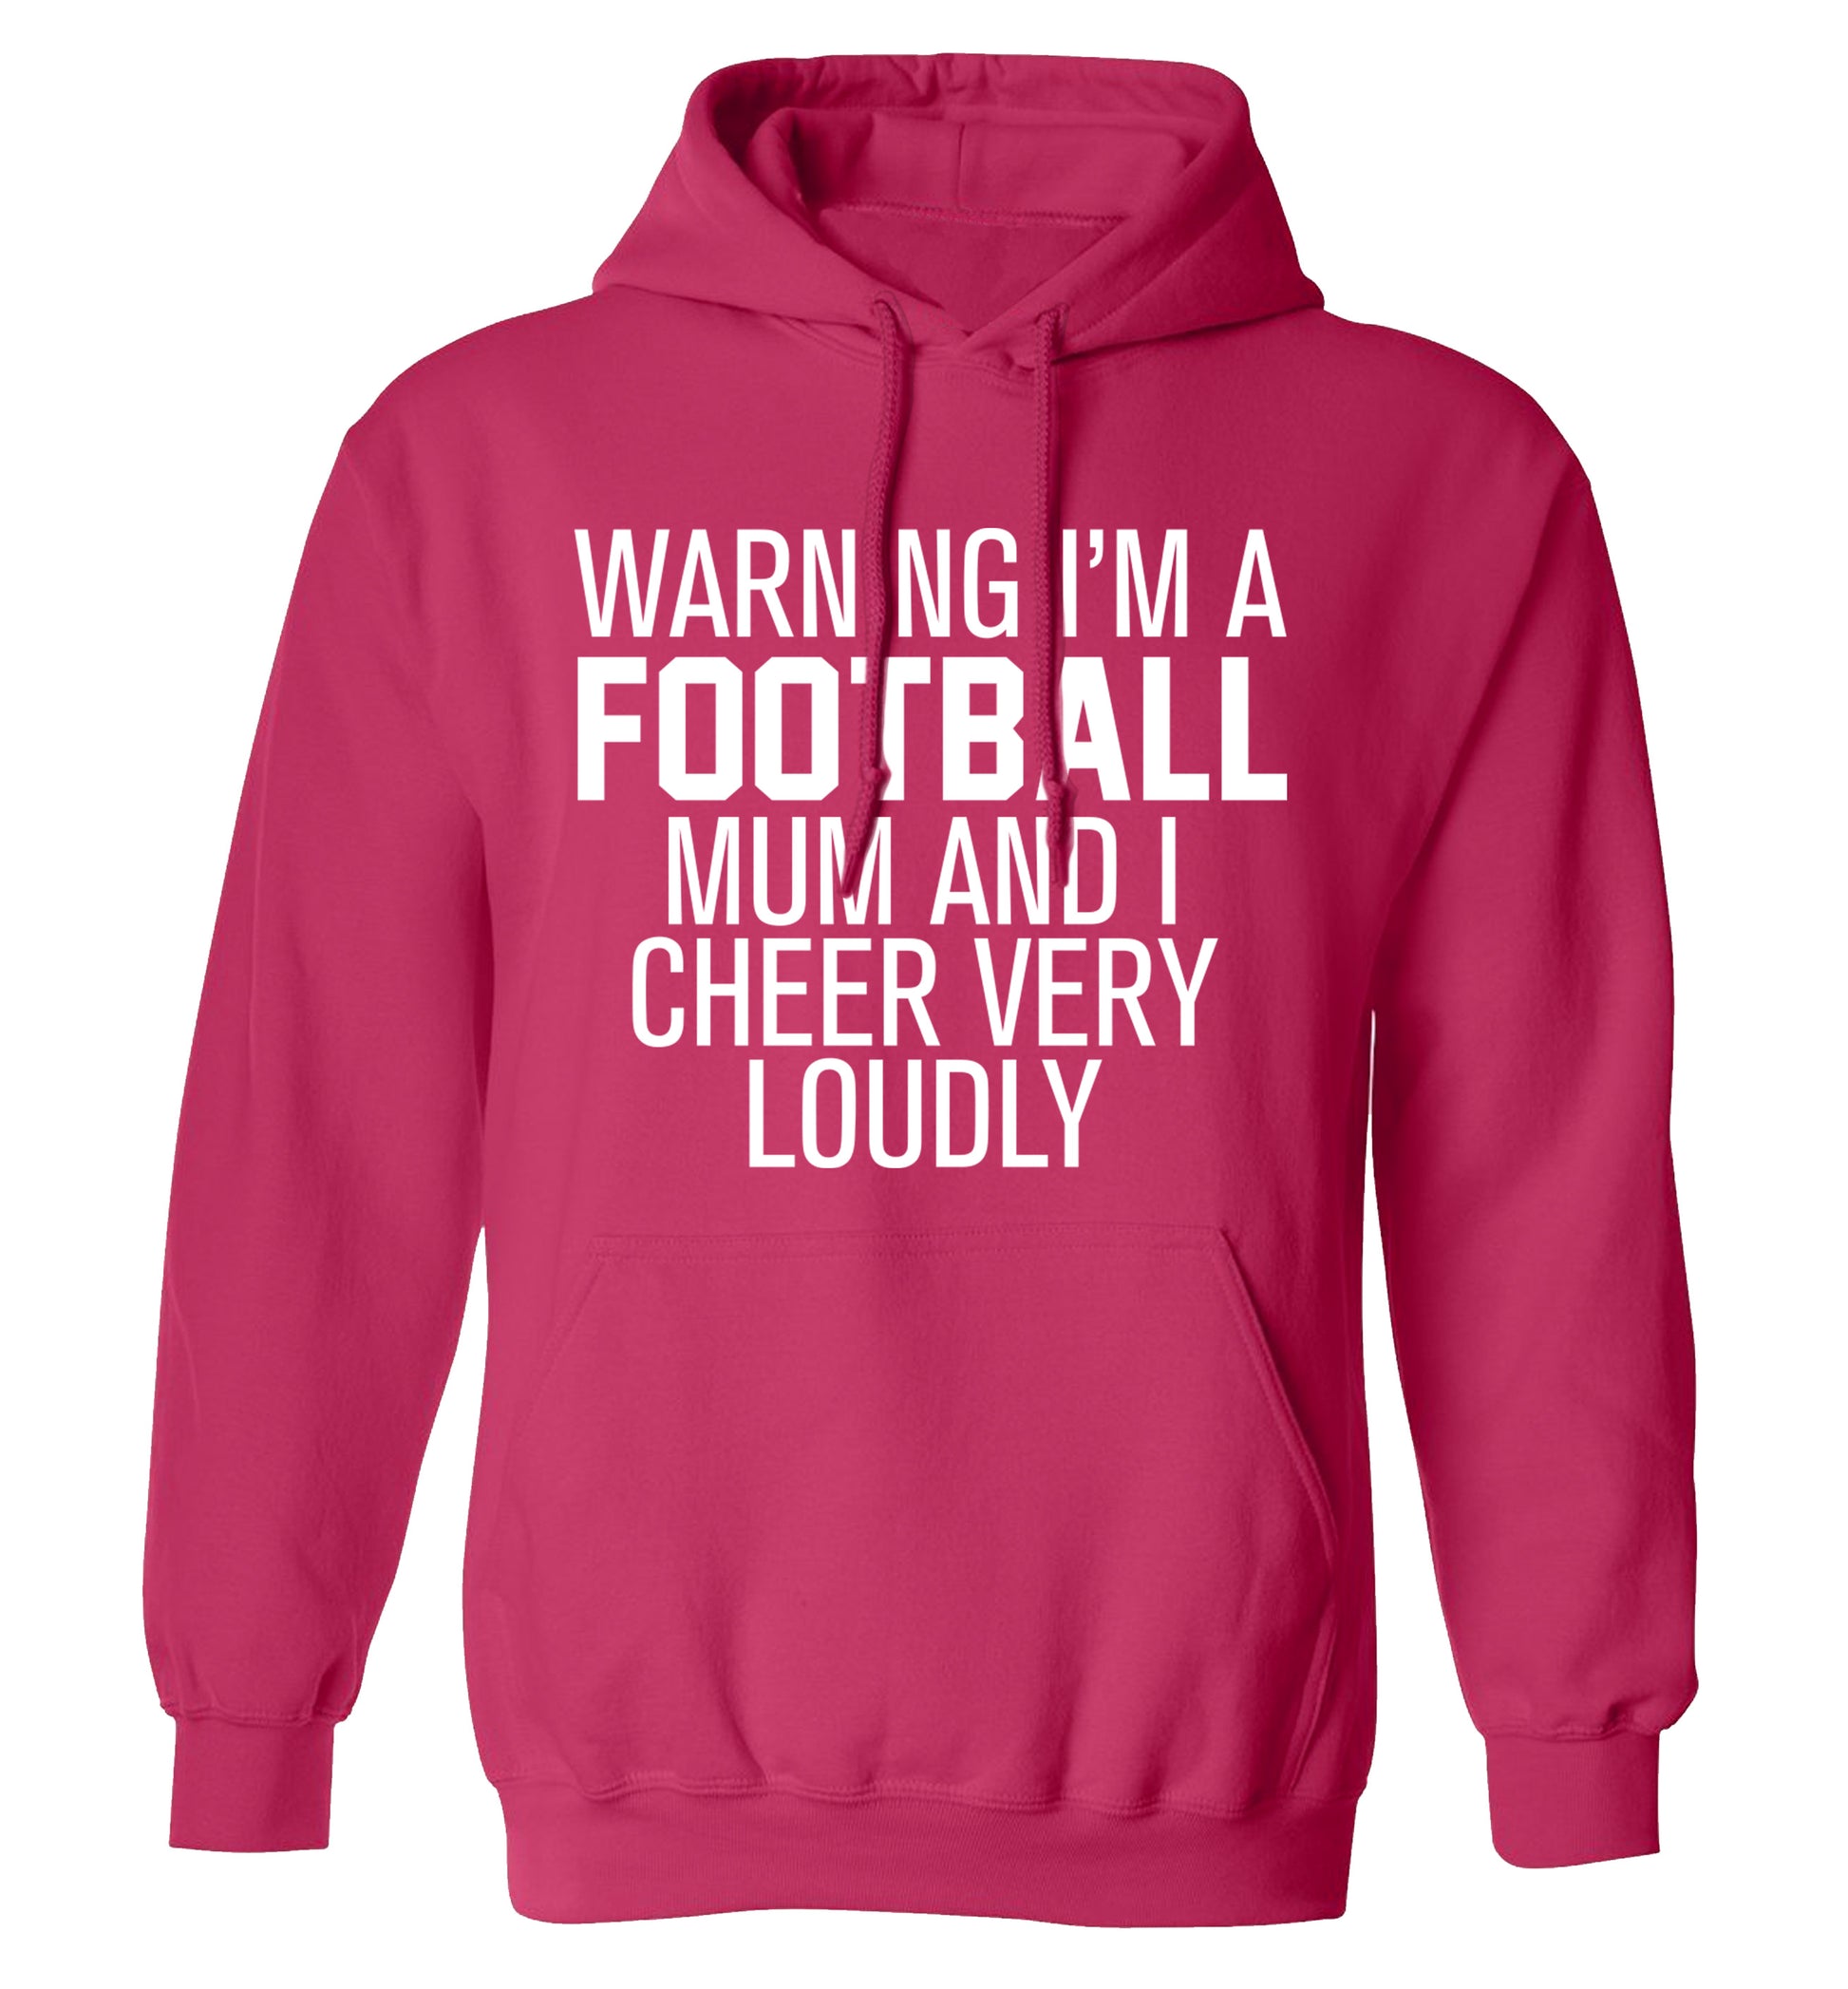 Warning I'm a football mum and I cheer very loudly adults unisexpink hoodie 2XL